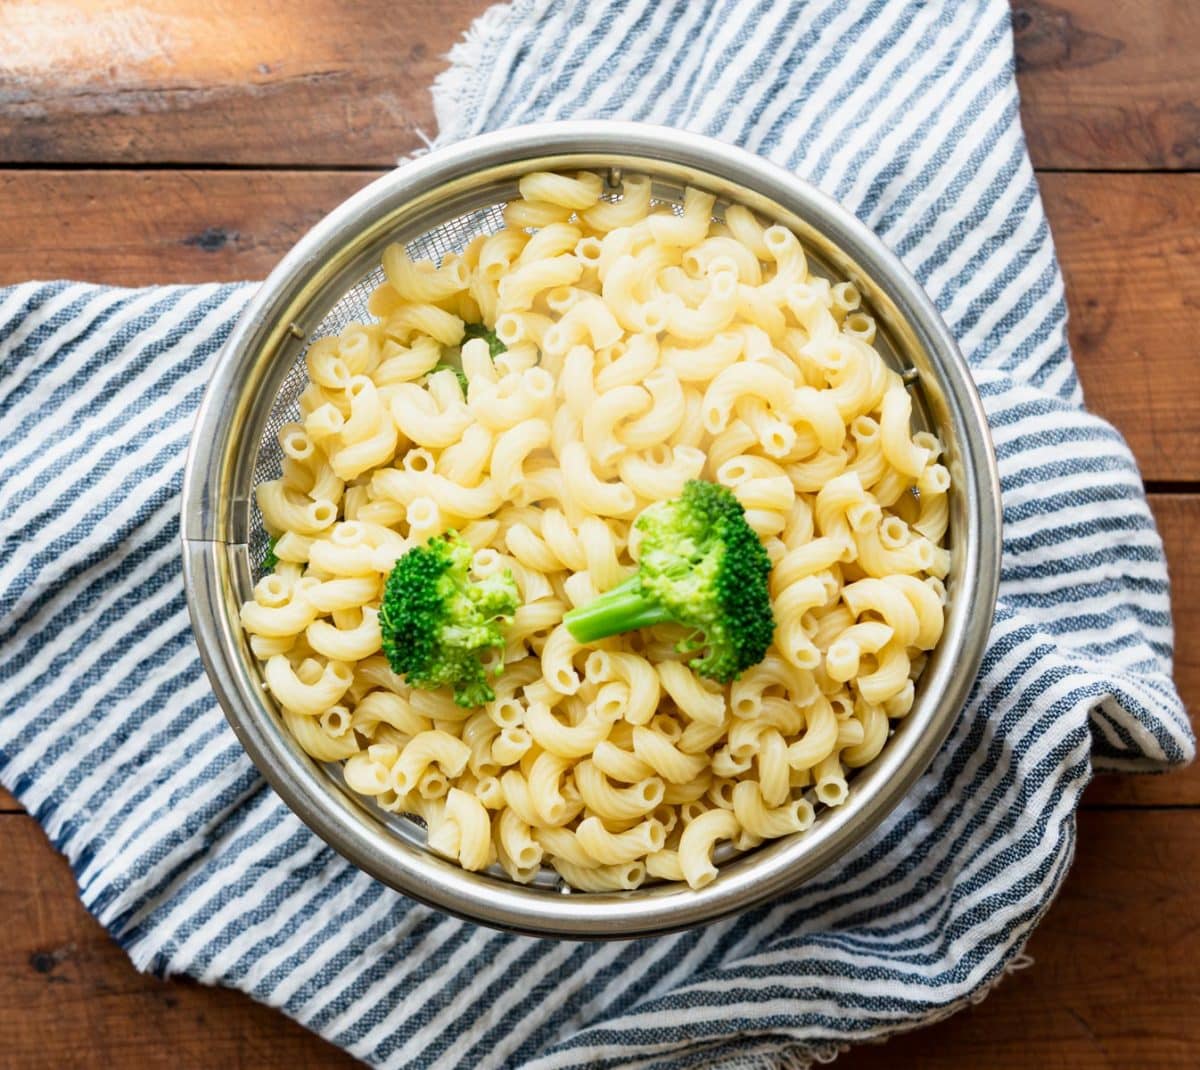 Elbow macaroni and broccoli florets in a colander.